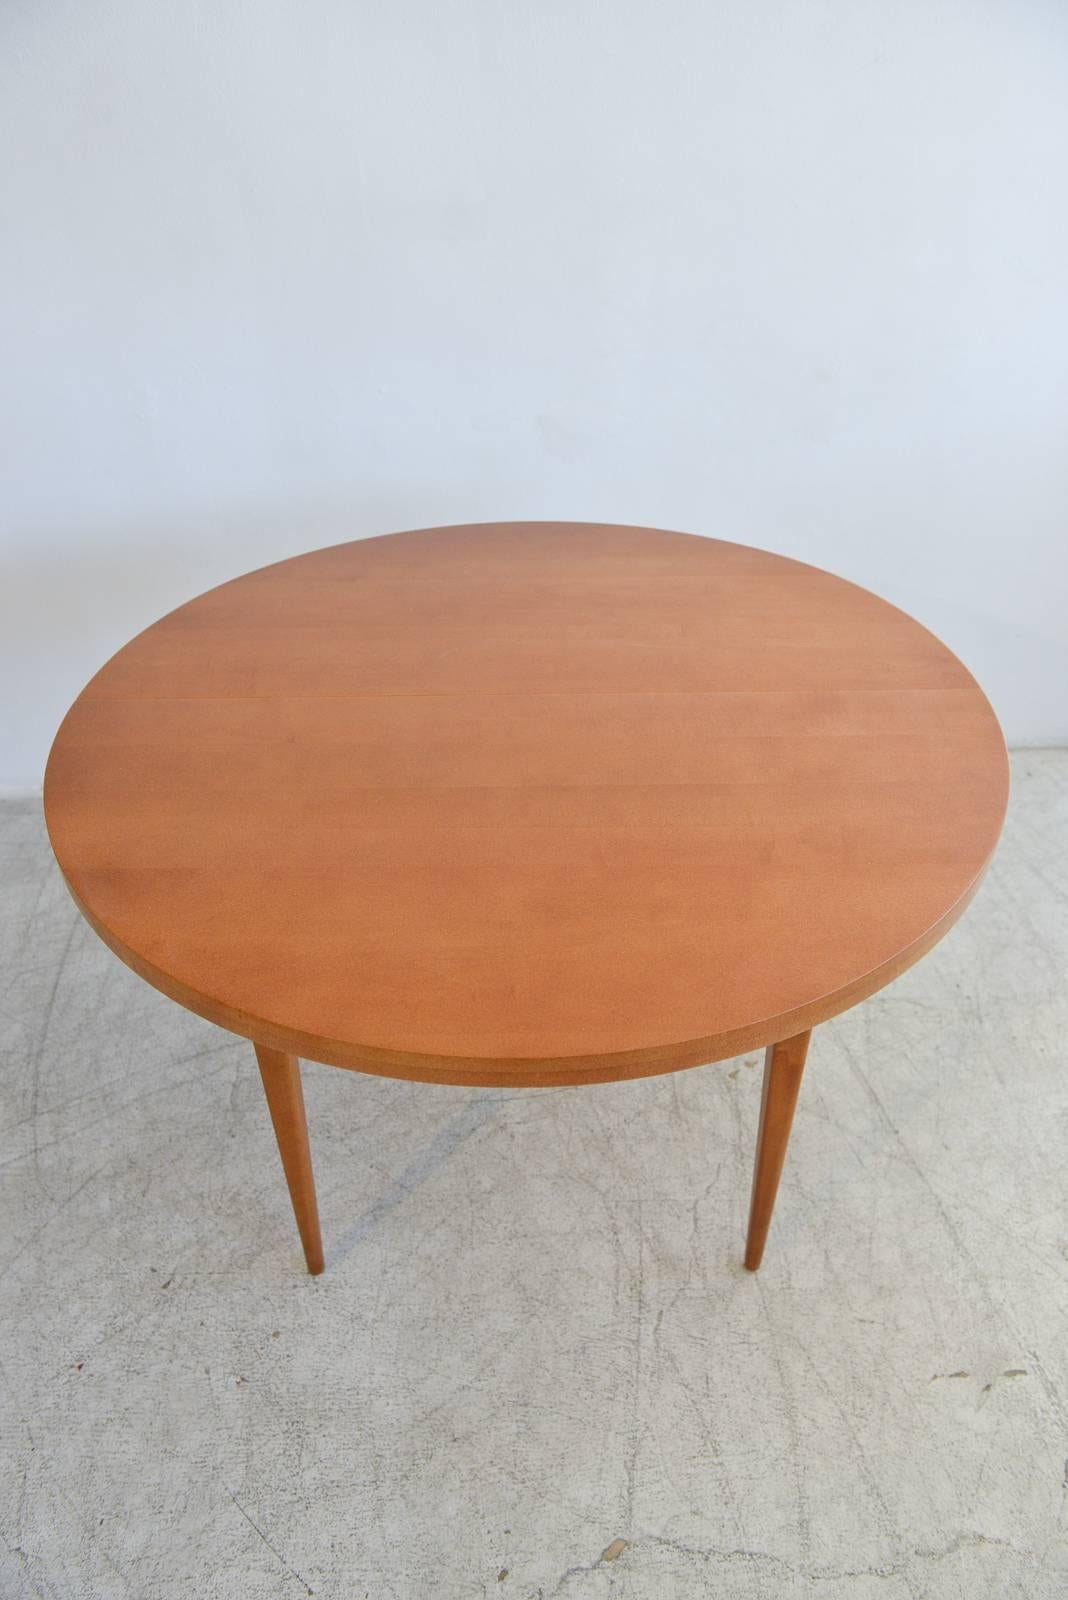 Paul McCobb round maple dining table with two extensions, circa 1955. Professionally restored in showroom condition. Extends to oval shape with two leaves that store separately.



Round measures 42.5